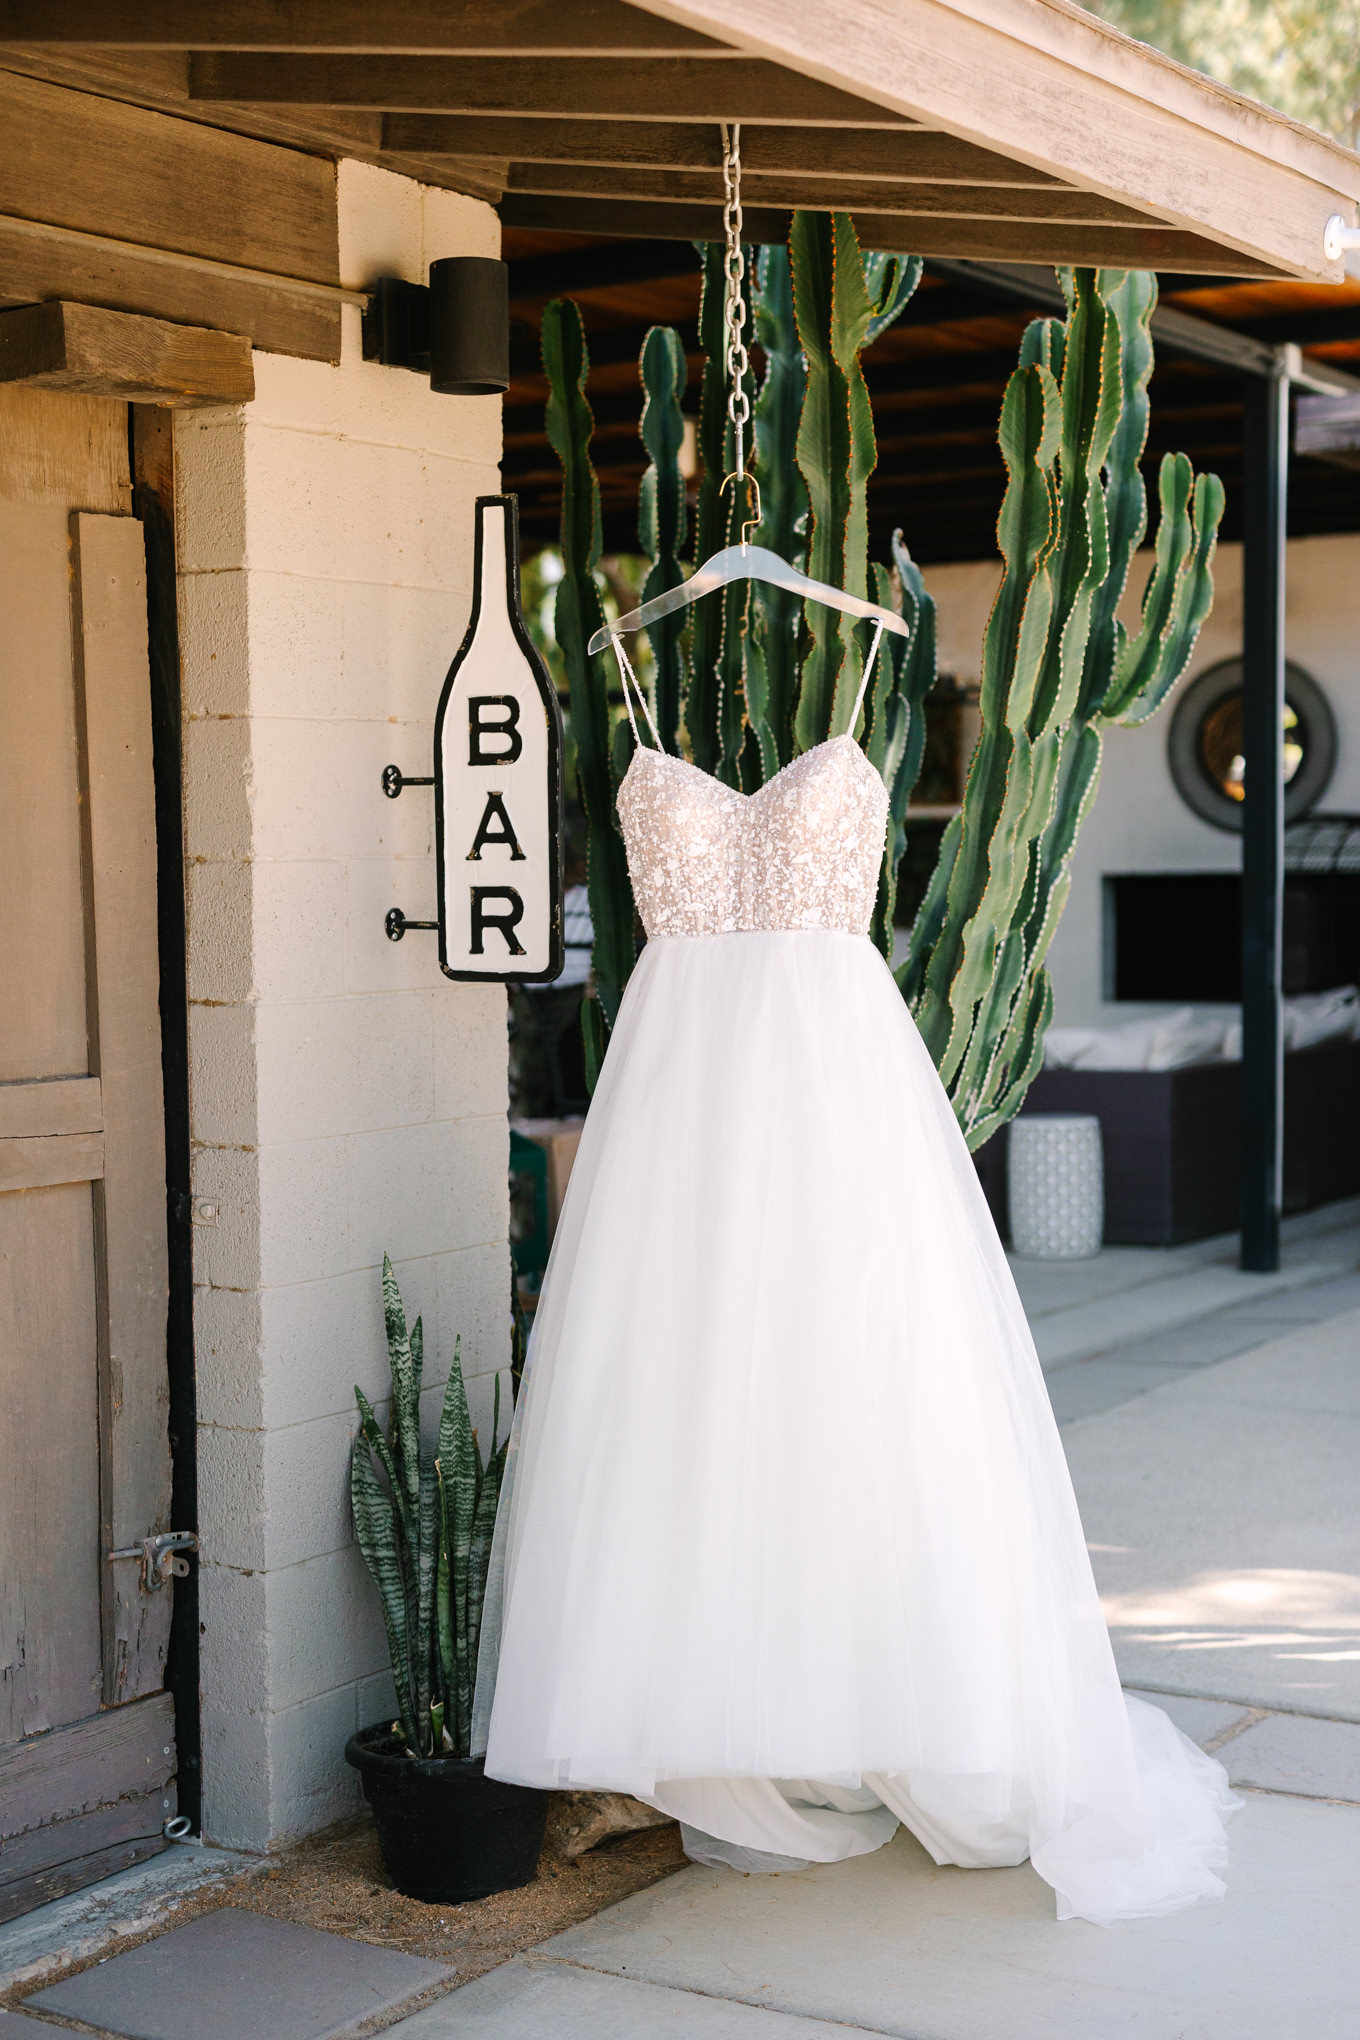 Bridal gown hanging | Pink and orange Lautner Compound wedding | Colorful Palm Springs wedding photography | #palmspringsphotographer #palmspringswedding #lautnercompound #southerncaliforniawedding  Source: Mary Costa Photography | Los Angeles